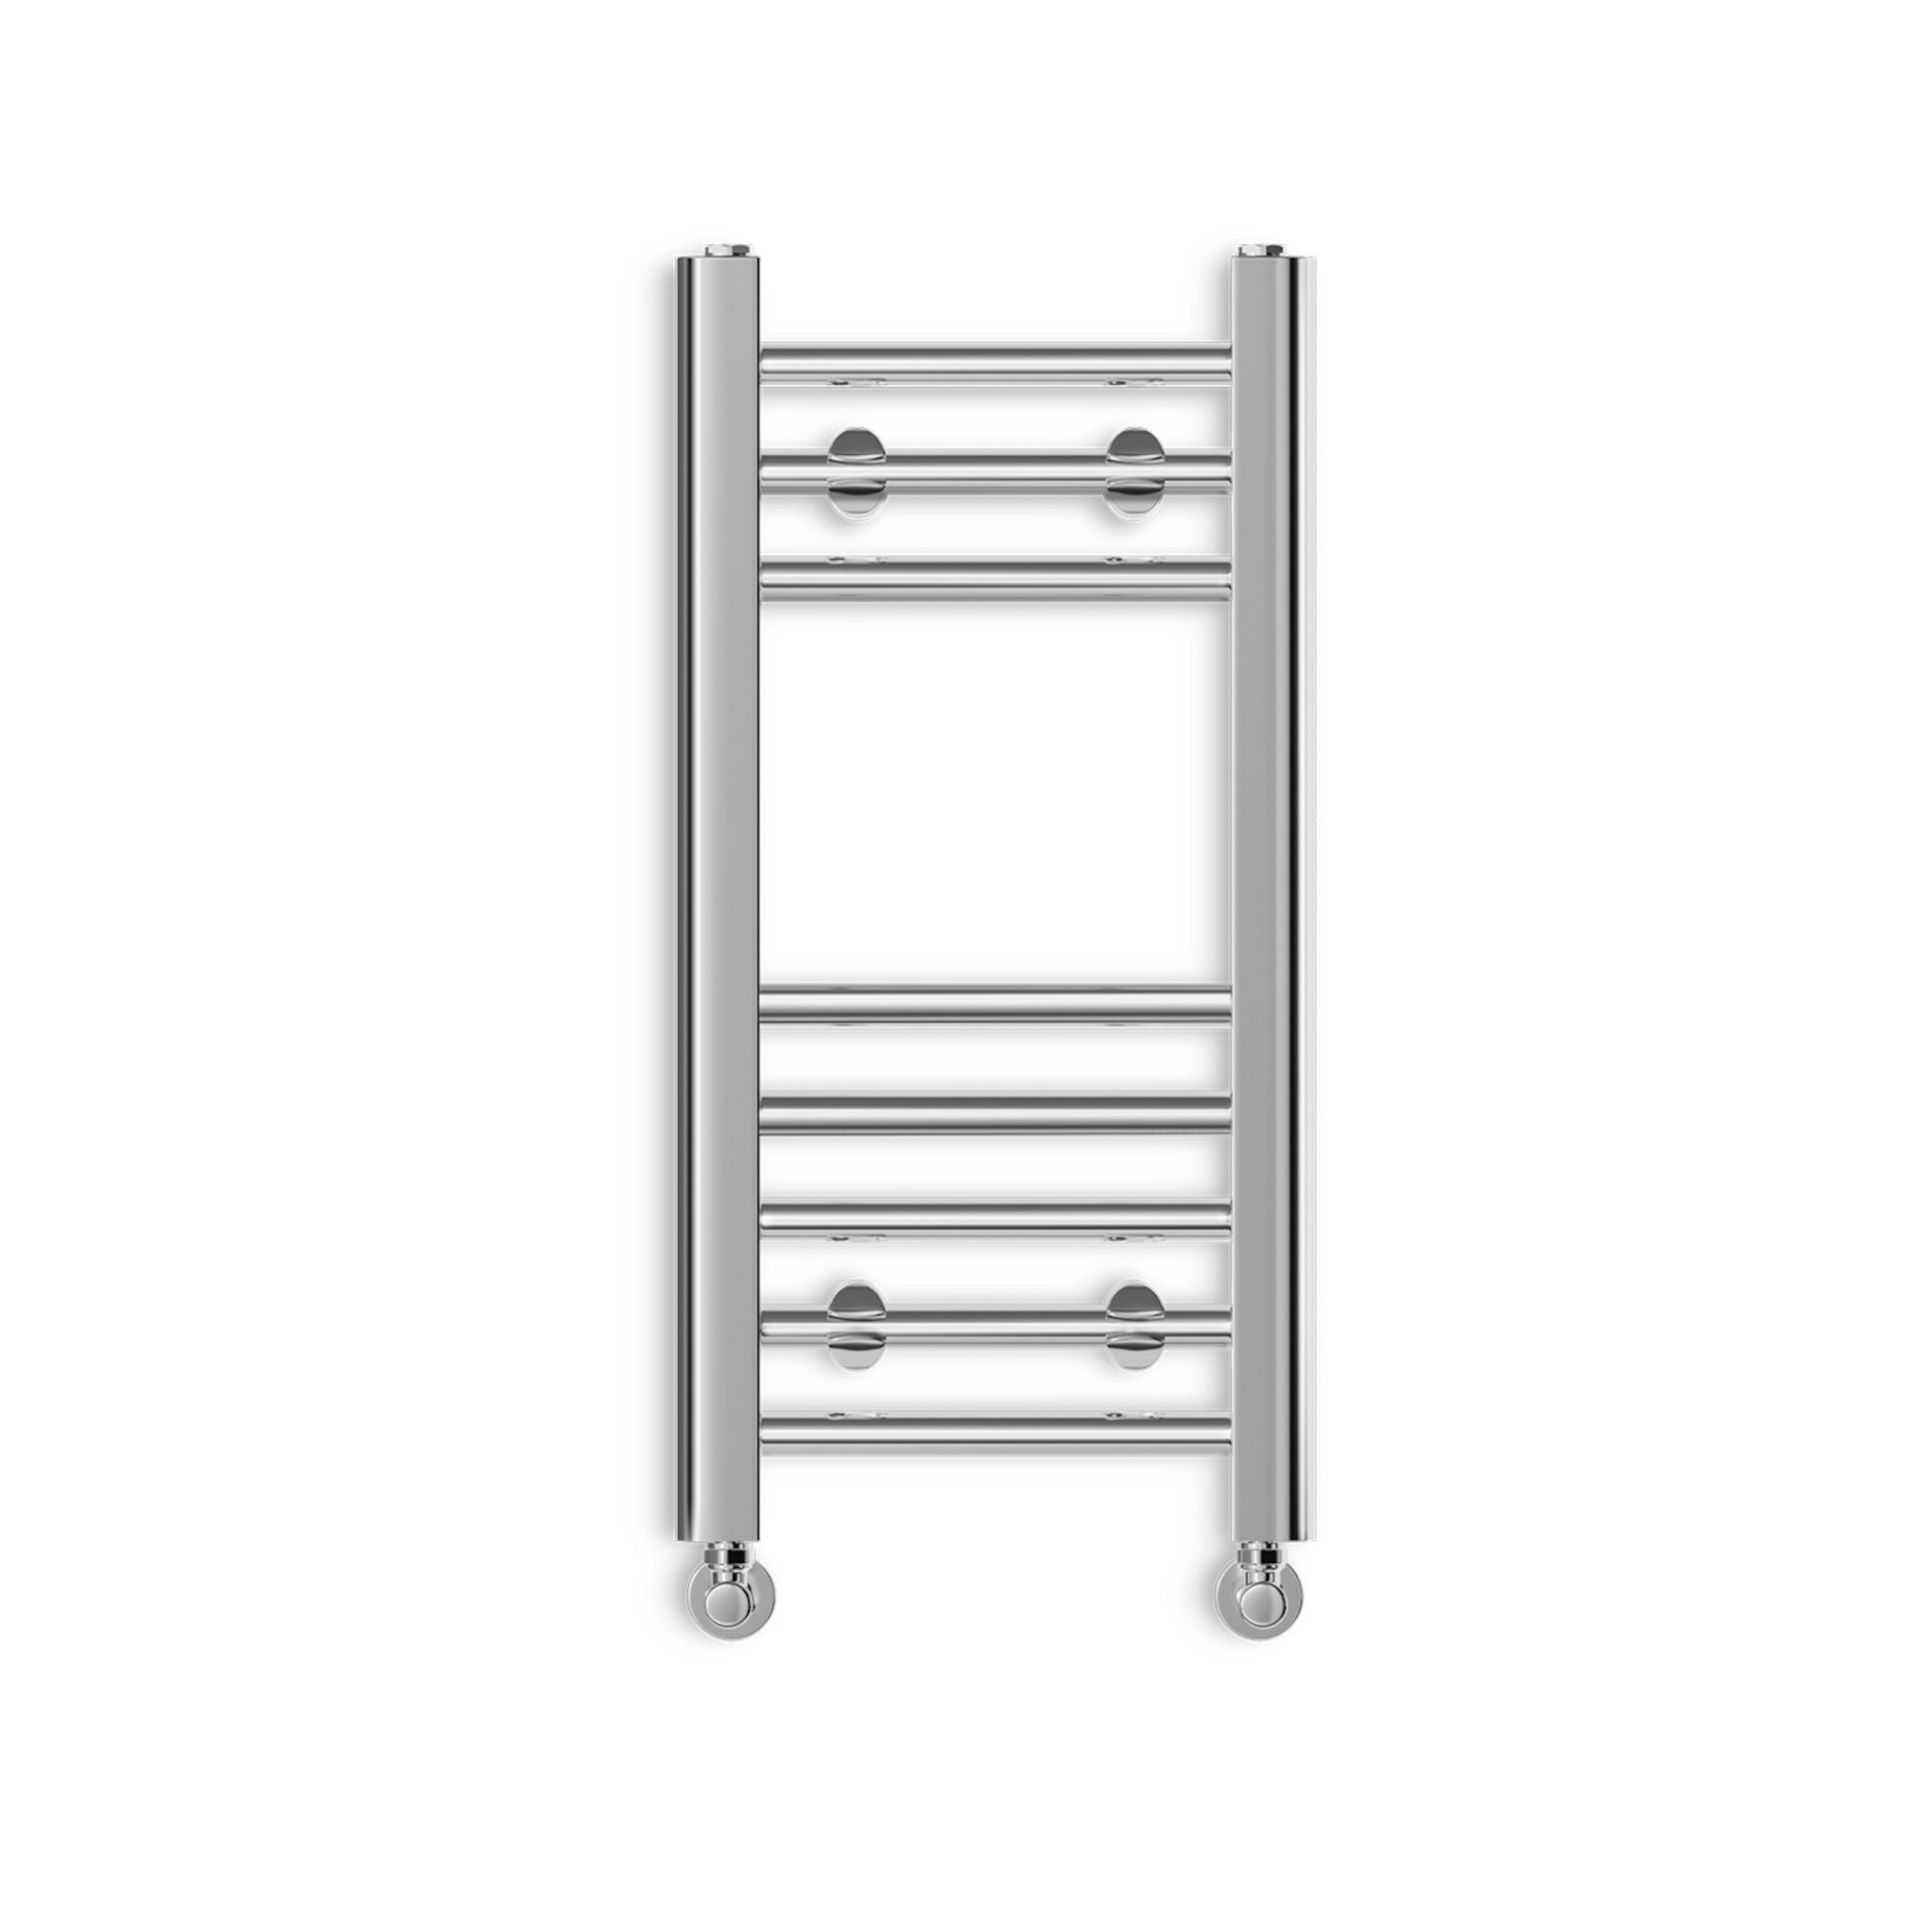 (KL191) 600x300mm Straight Heated Towel Radiator. Low carbon steel chrome plated radiator This - Image 2 of 2